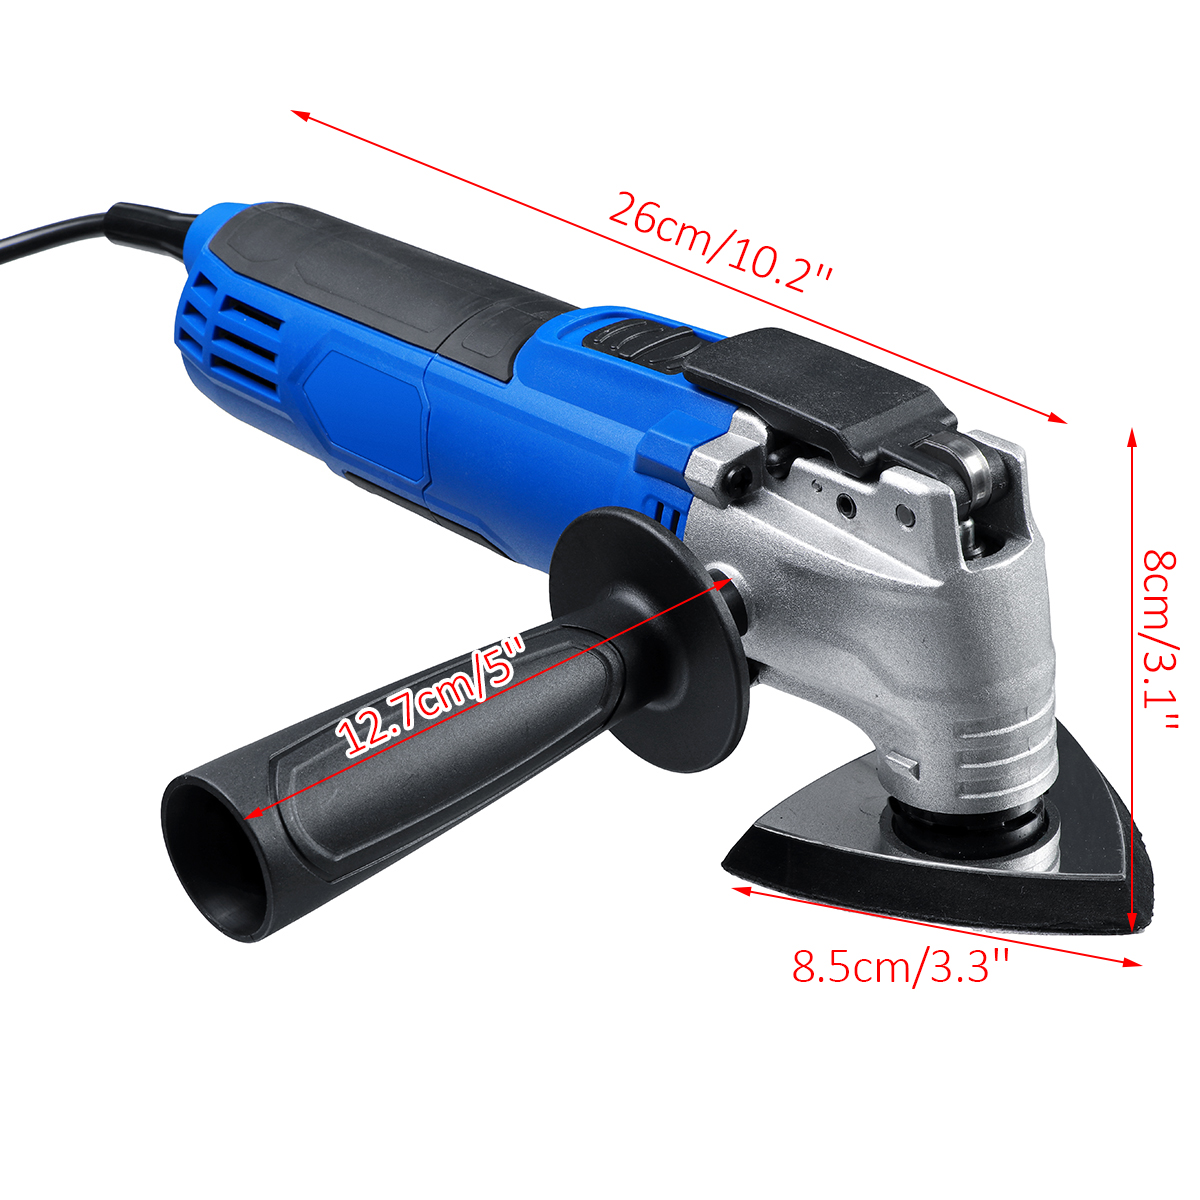 220V-Electric-Polisher-Cutter-Trimmer-Electric-Saw-Renovator-Tool-Woodworking-Oscillating-Tool-1800975-17